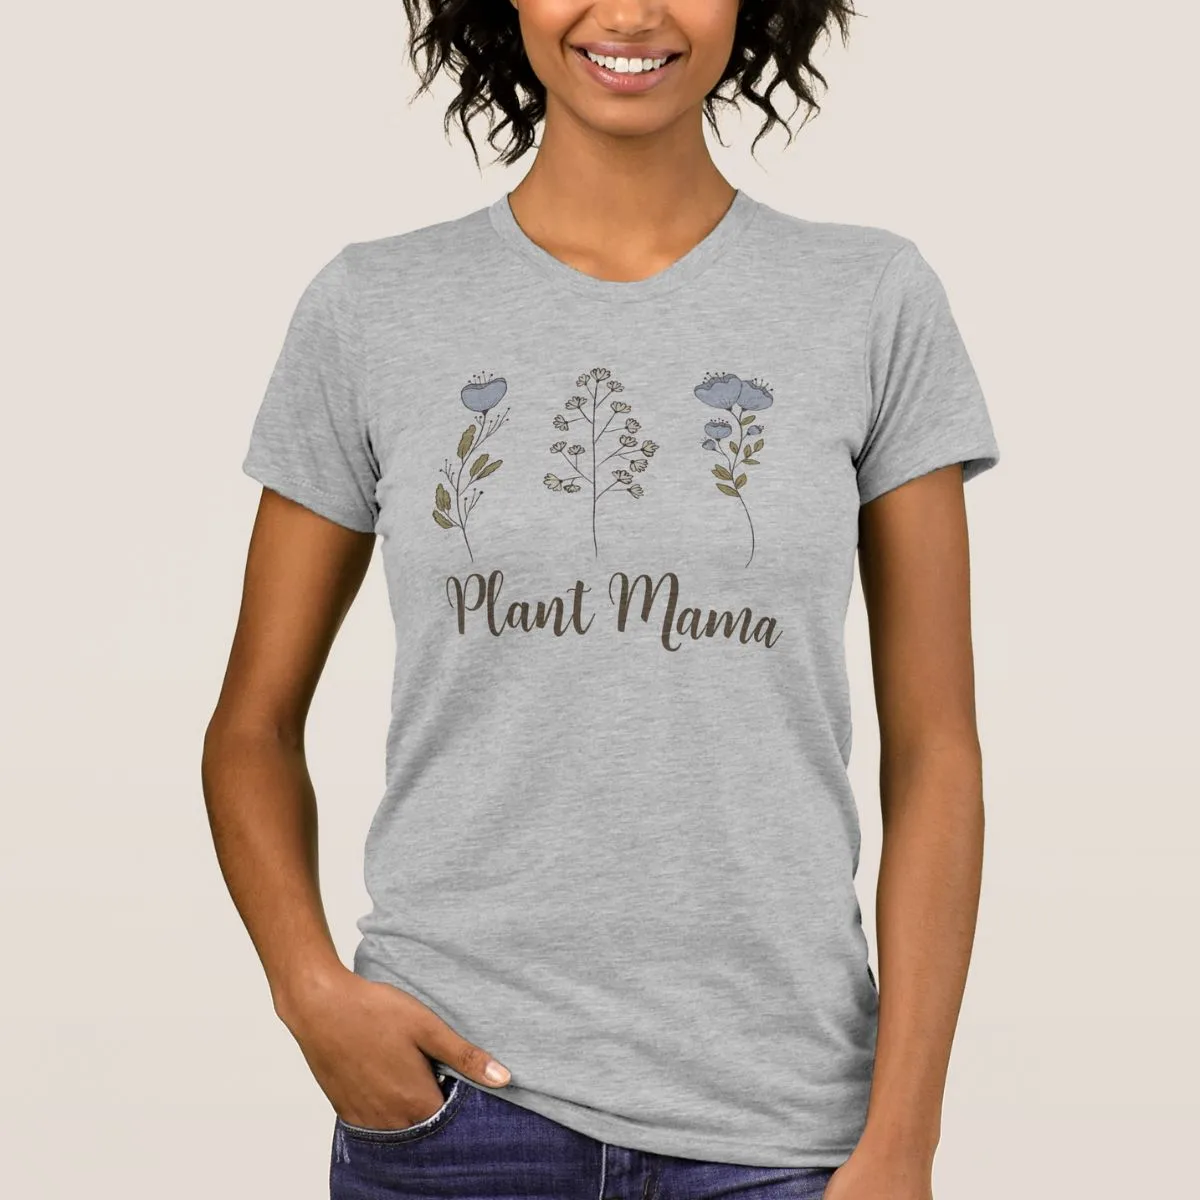 Young woman dressed in a gray t-shirt saying "plant mama".